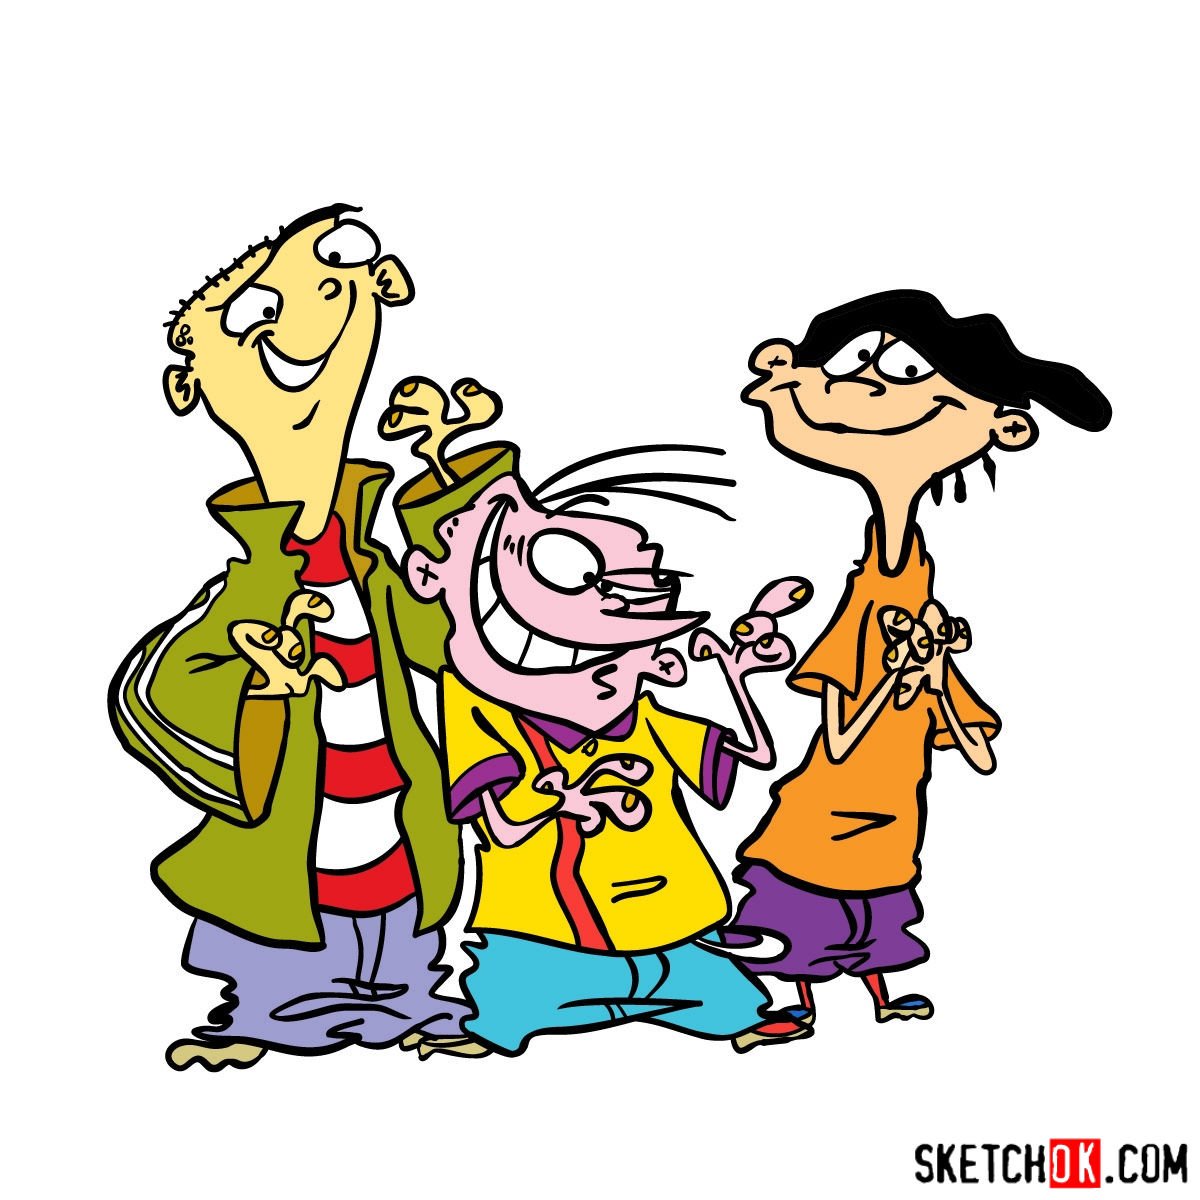 How to draw Ed, Edd and Eddy together